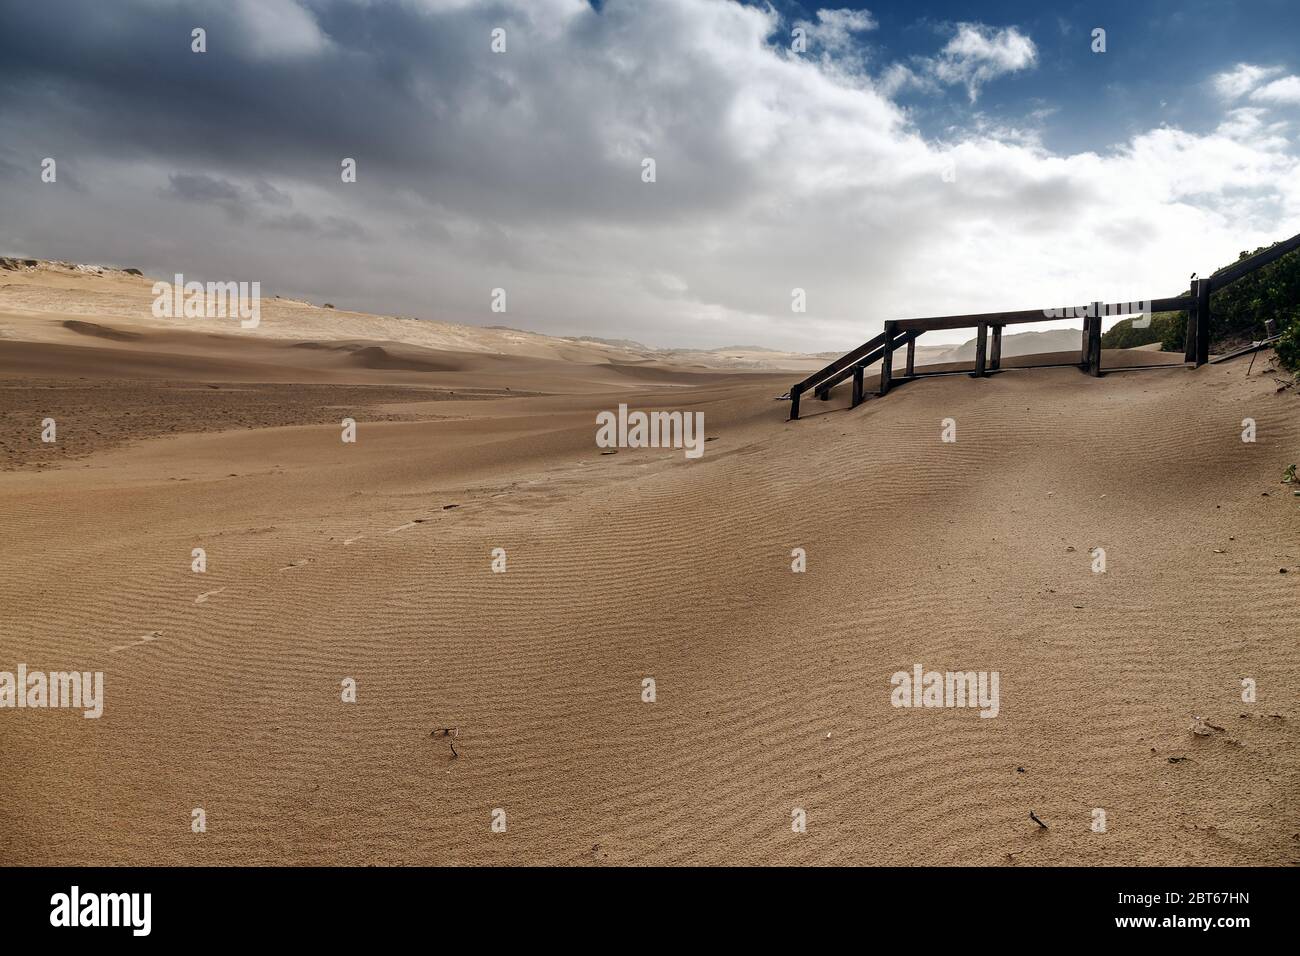 A tranquil scene of the remote Diaz beach  with footsteps in the sand dune leading to wooden steps, Eastern Cape Province, South Africa Stock Photo